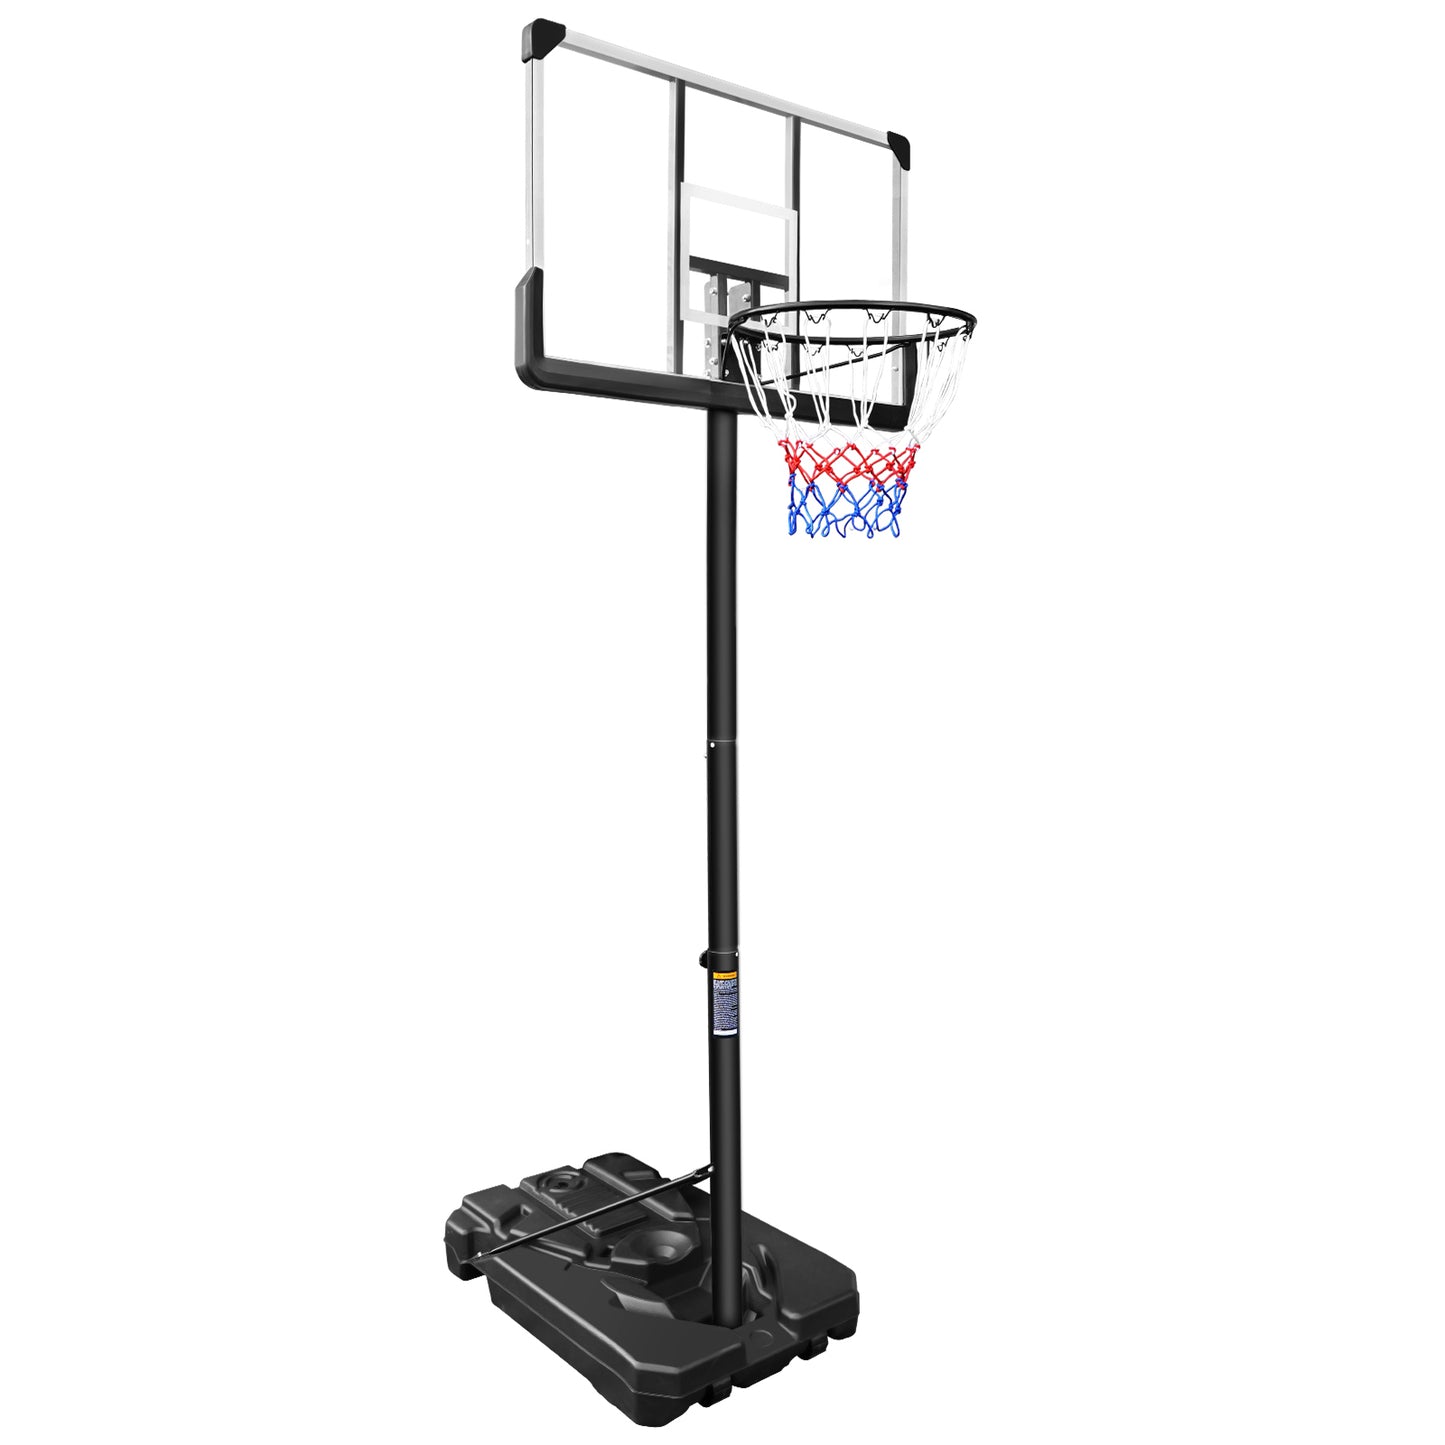 Portable Basketball Hoop & Goal Basketball System Basketball Equipment Height Adjustable 7ft - 10ft with 44 Inch Backboard and Wheels for Adults Youth Indoor Outdoor